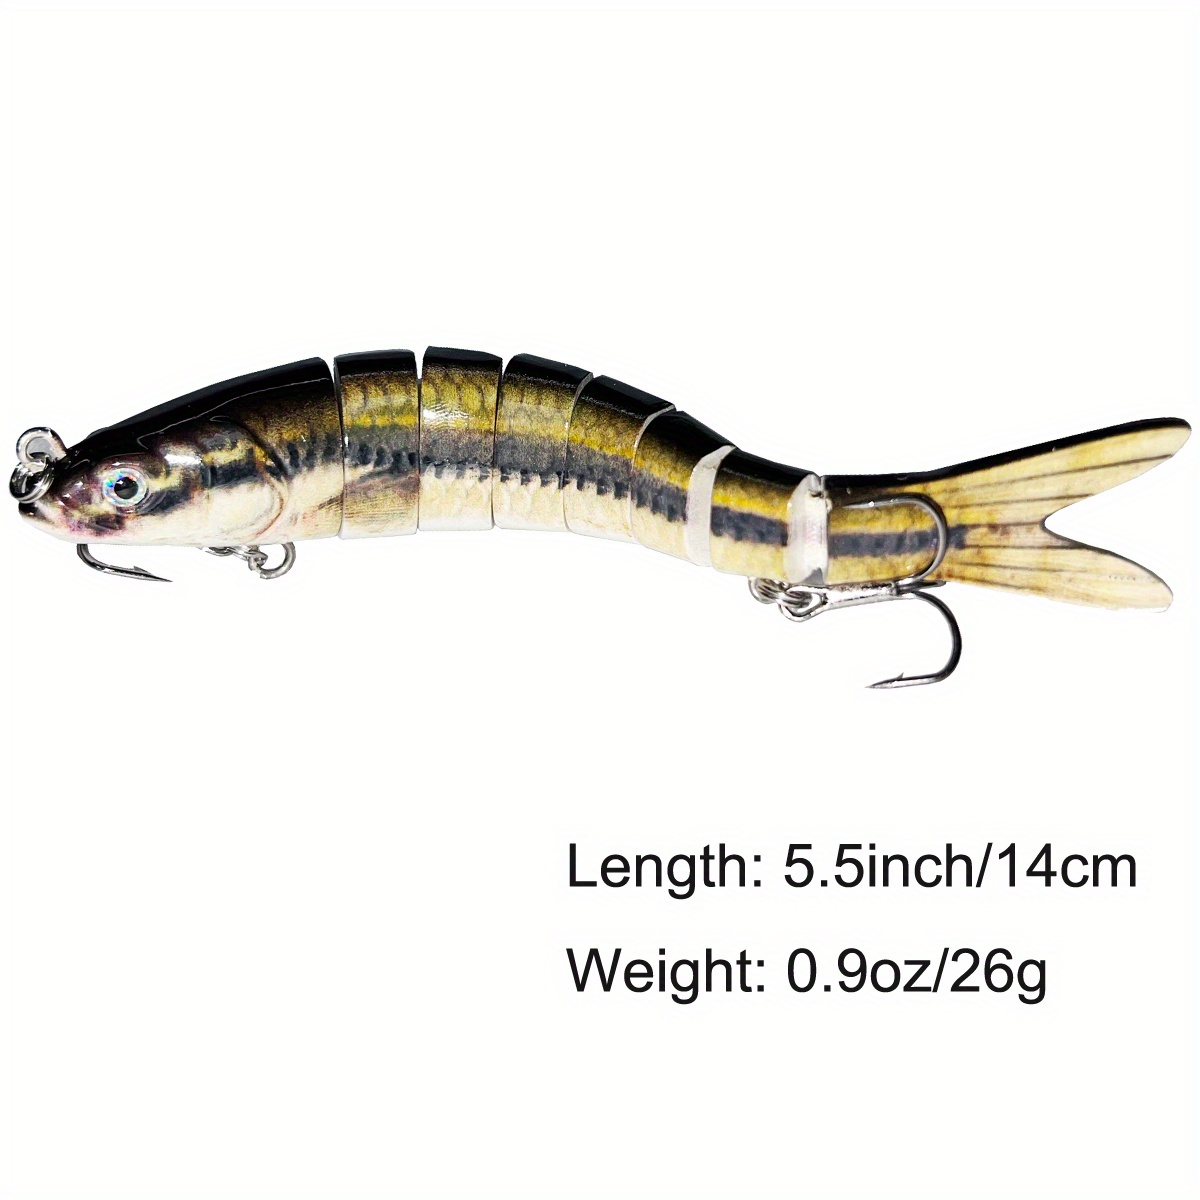 Multi Jointed Swimbaits Slow Sinking Bionic Swimming Lures for